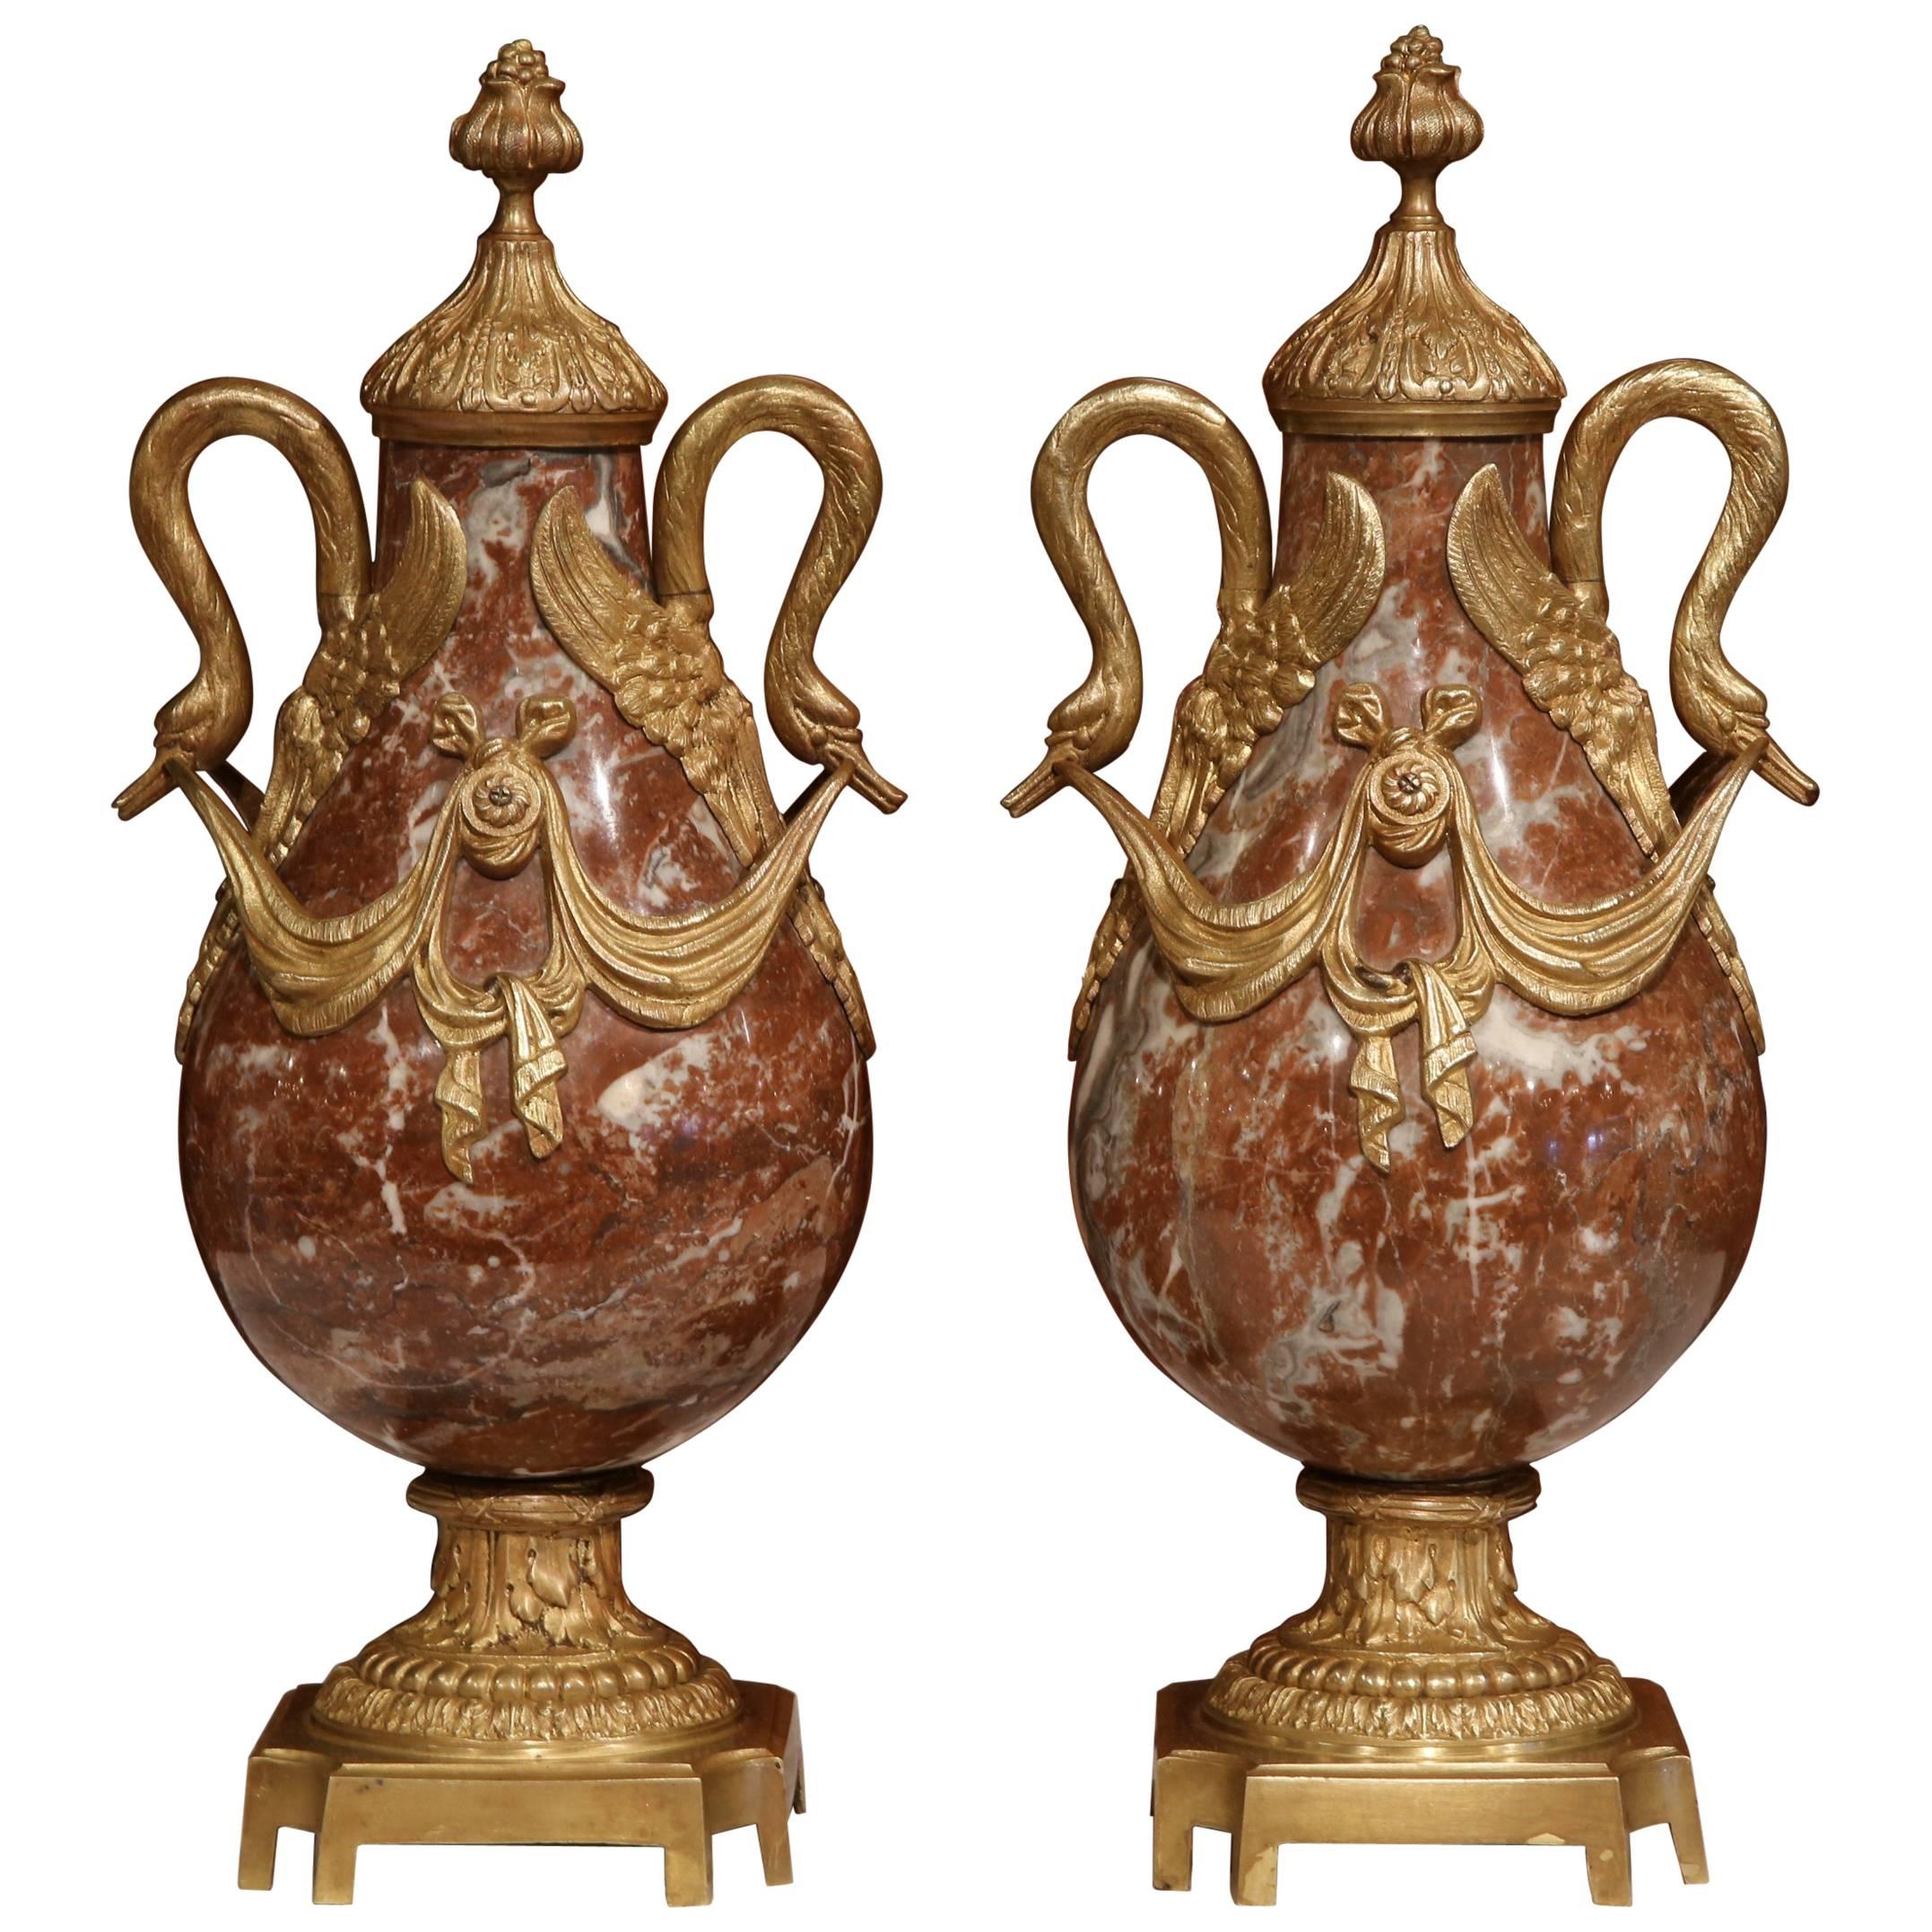 Pair of 19th Century French Red Marble and Bronze Cassolettes with Swan Handles